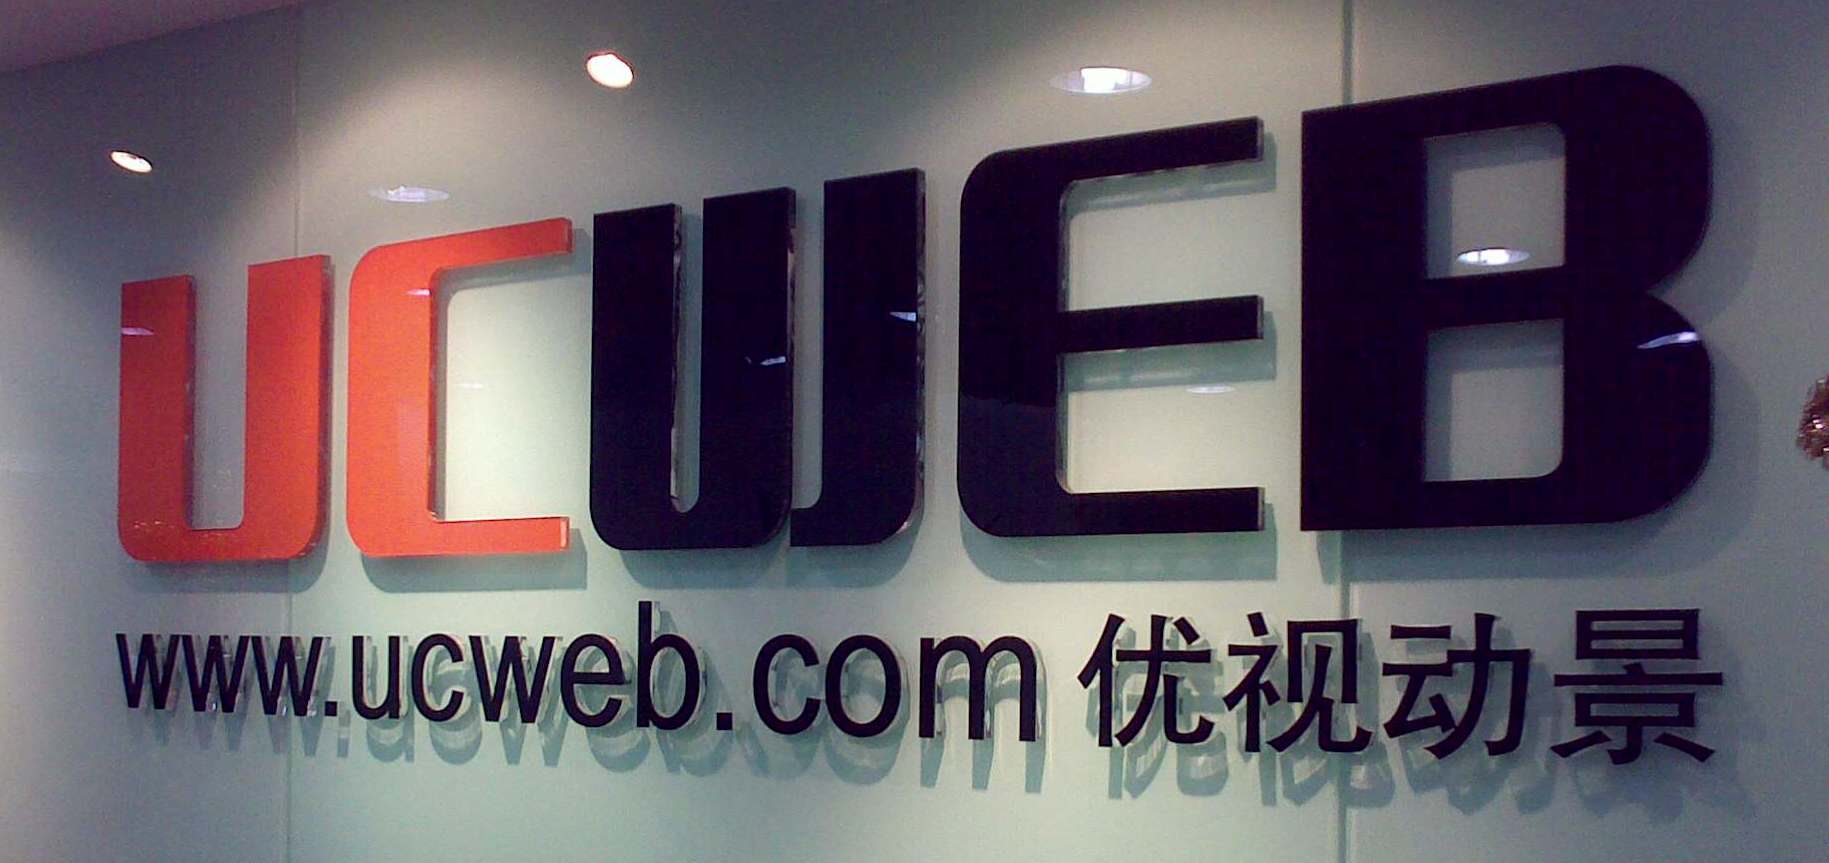 ucweb ceo yu yongfu on how mobile 'super apps' are taking over the globe